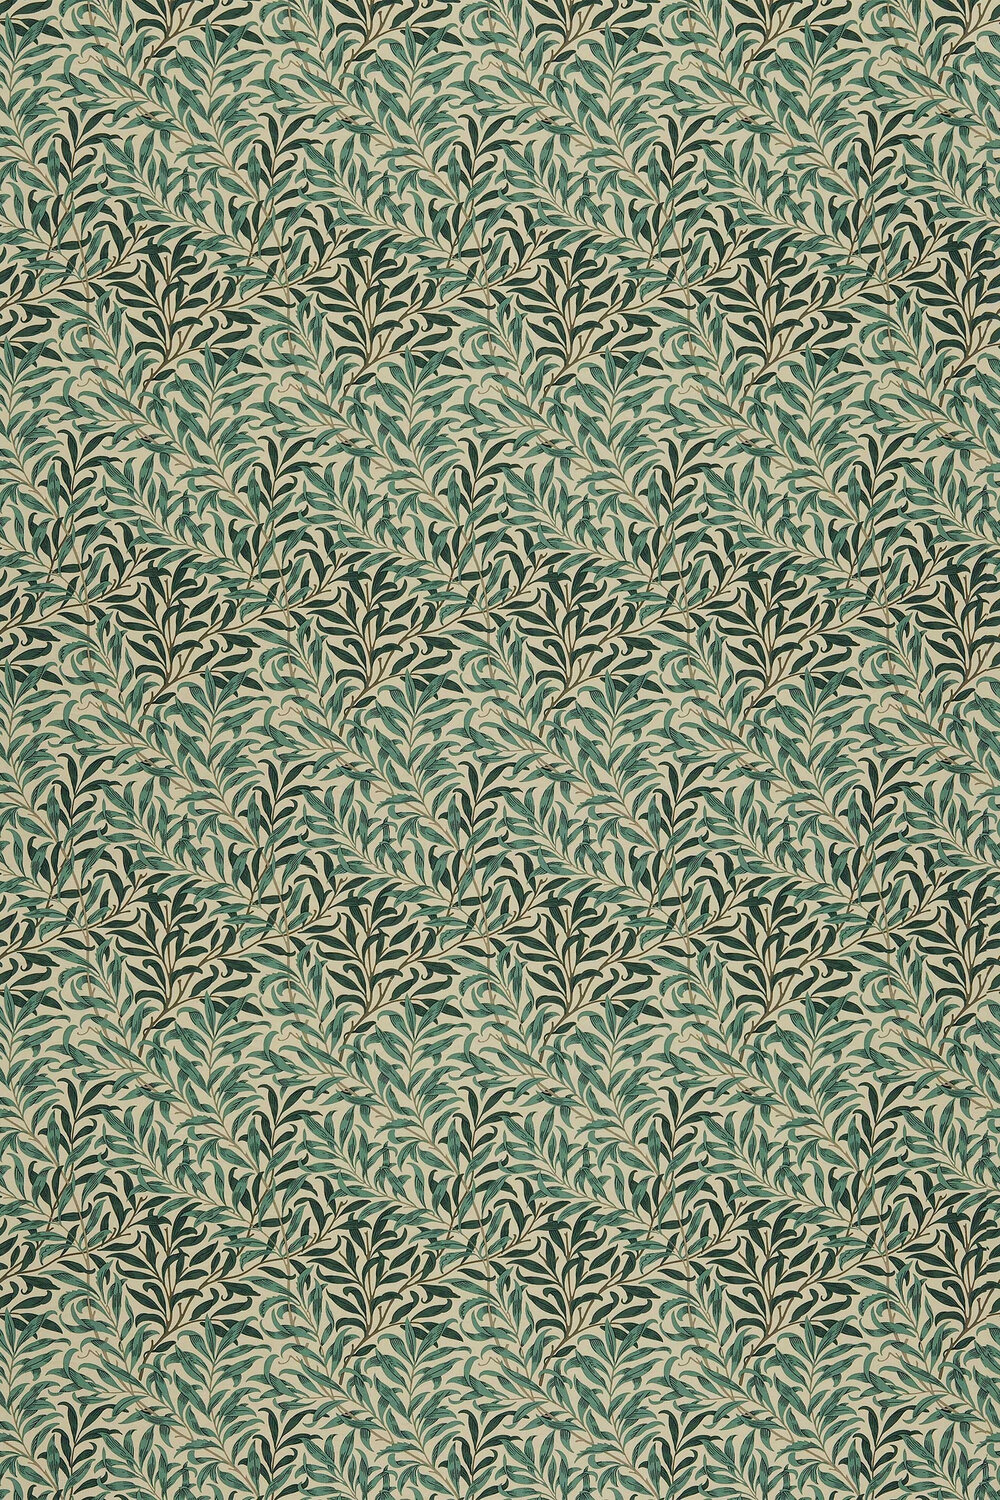 Willow Boughs Fabric - Taupe / Green - by Morris